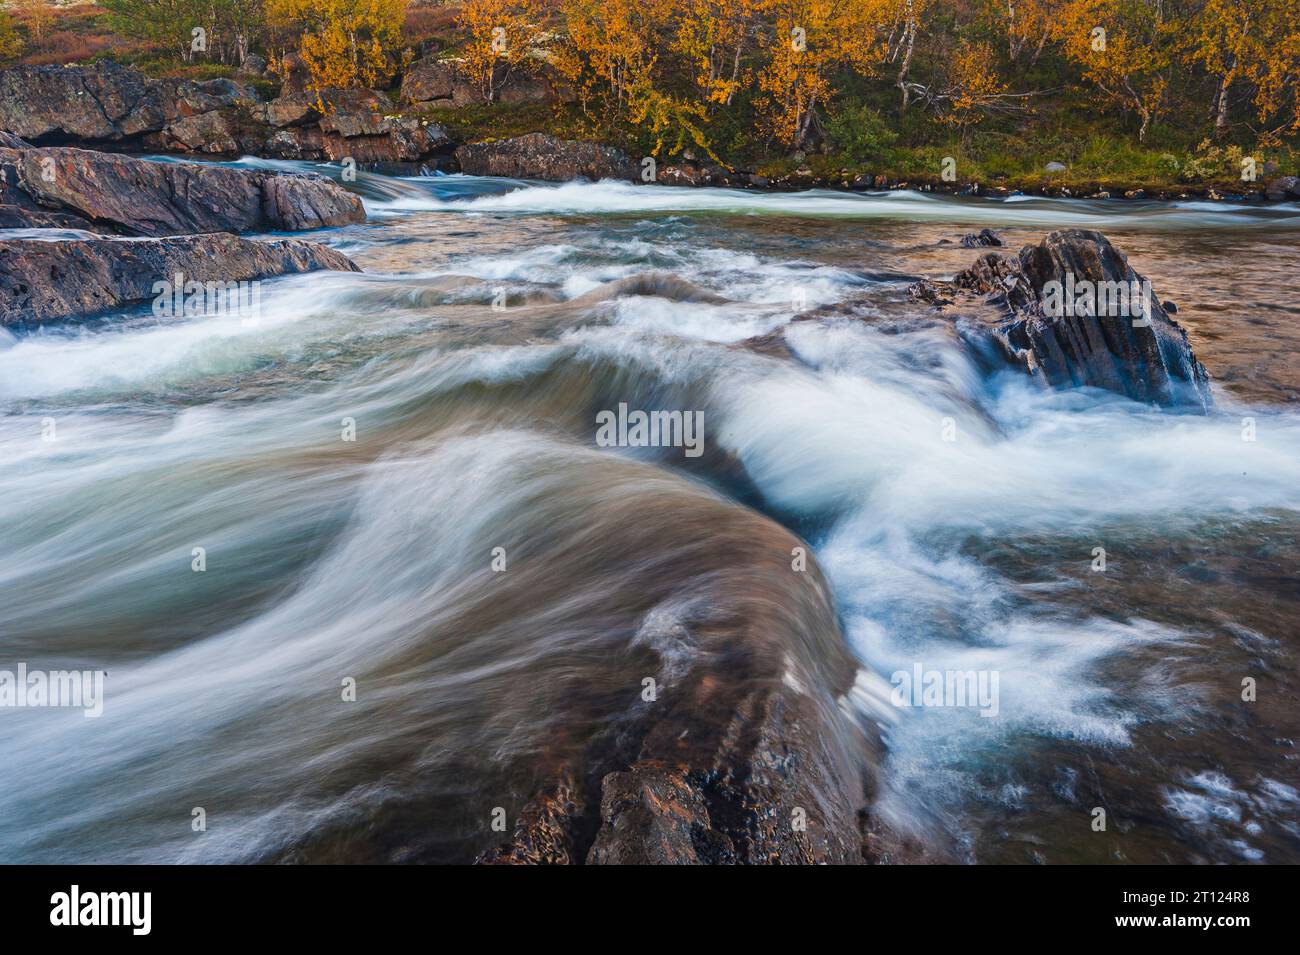 An autumn river with rapid flowing water and scenic landscape. Stock Photo